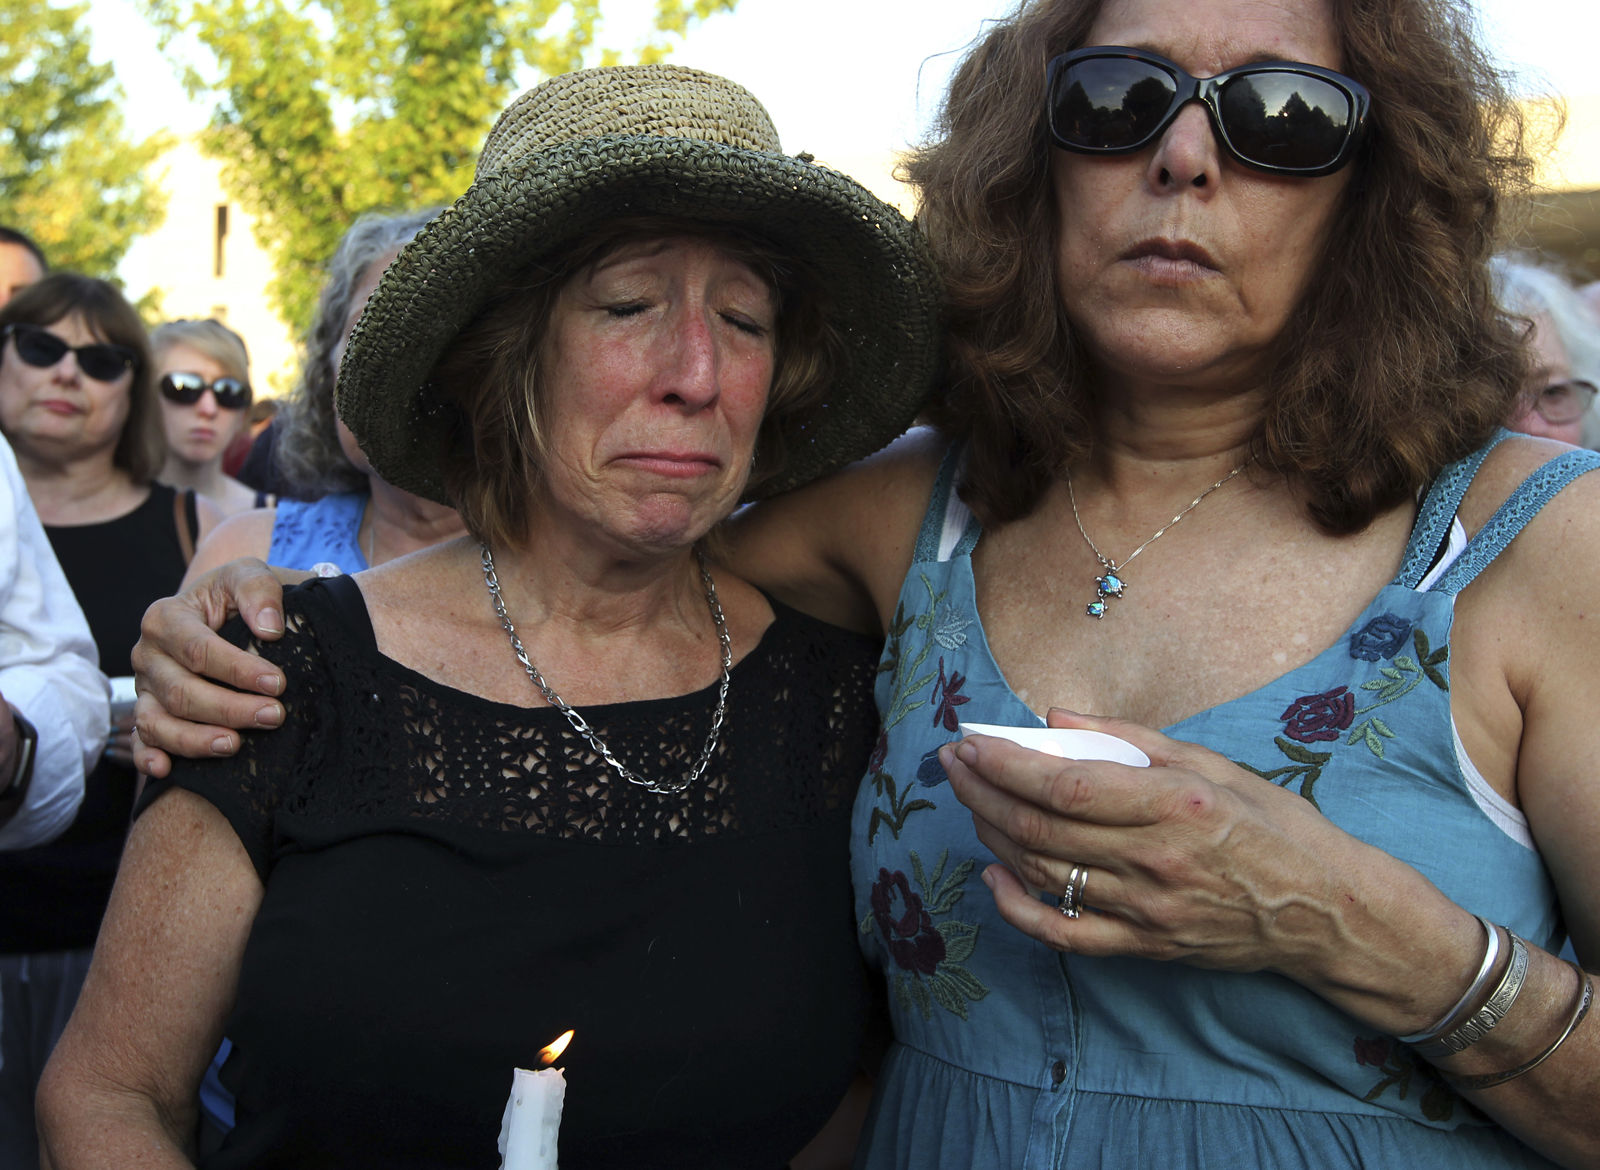 People gather for a candlelight vigil across the street from where five journalists were slain in their newsroom in Annapolis, Md., Friday, June 29, 2018. Prosecutors say Jarrod W. Ramos opened fire Thursday in the Capital Gazette newsroom. (AP Photo/Jose Luis Magana)